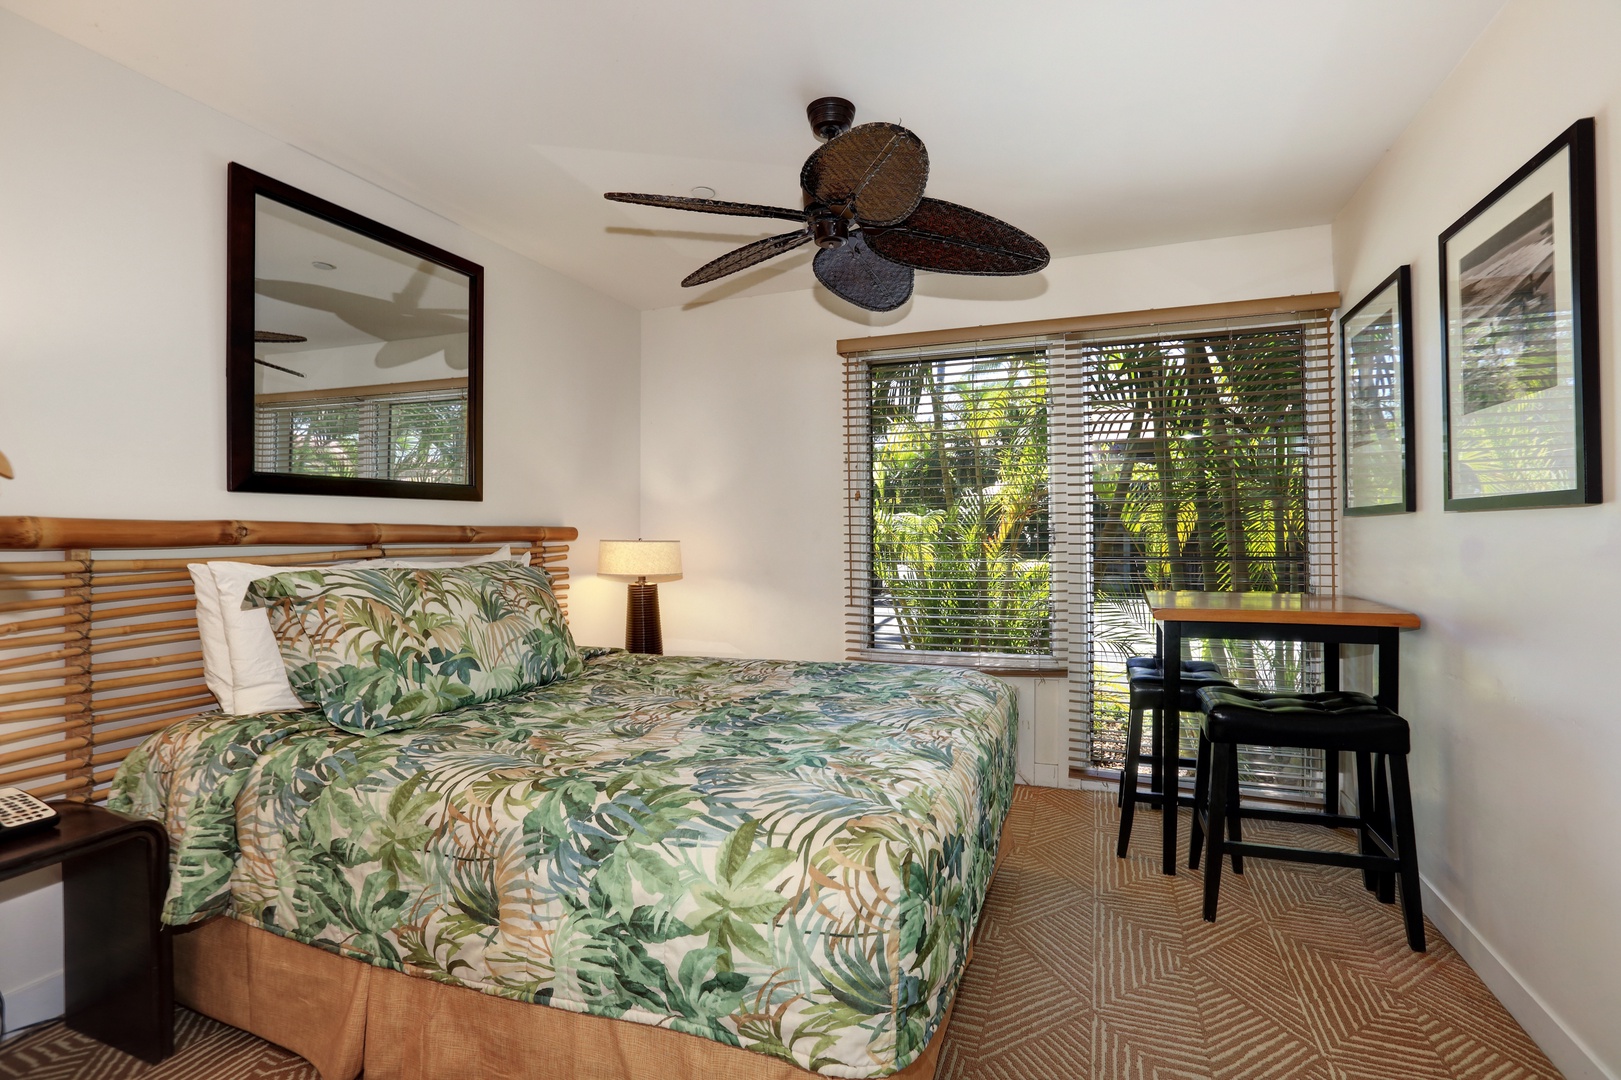 Lahaina Vacation Rentals, Aina Nalu B106 Studio - Extremely Rare Unit - A bright and airy space for your vacation!